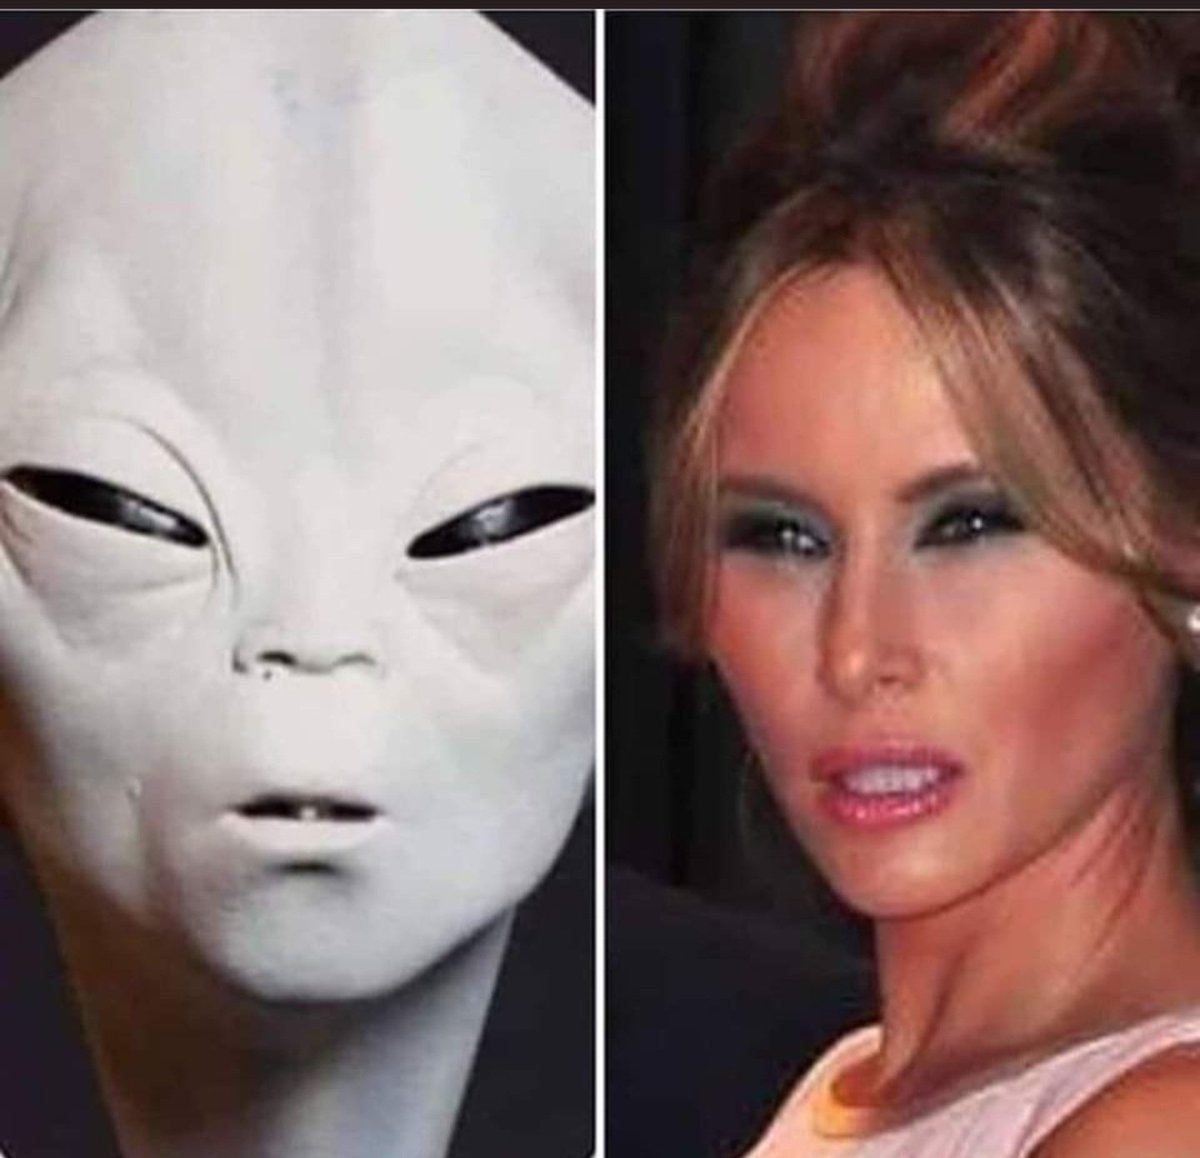 Melania?  Is that you?😅😂🤣